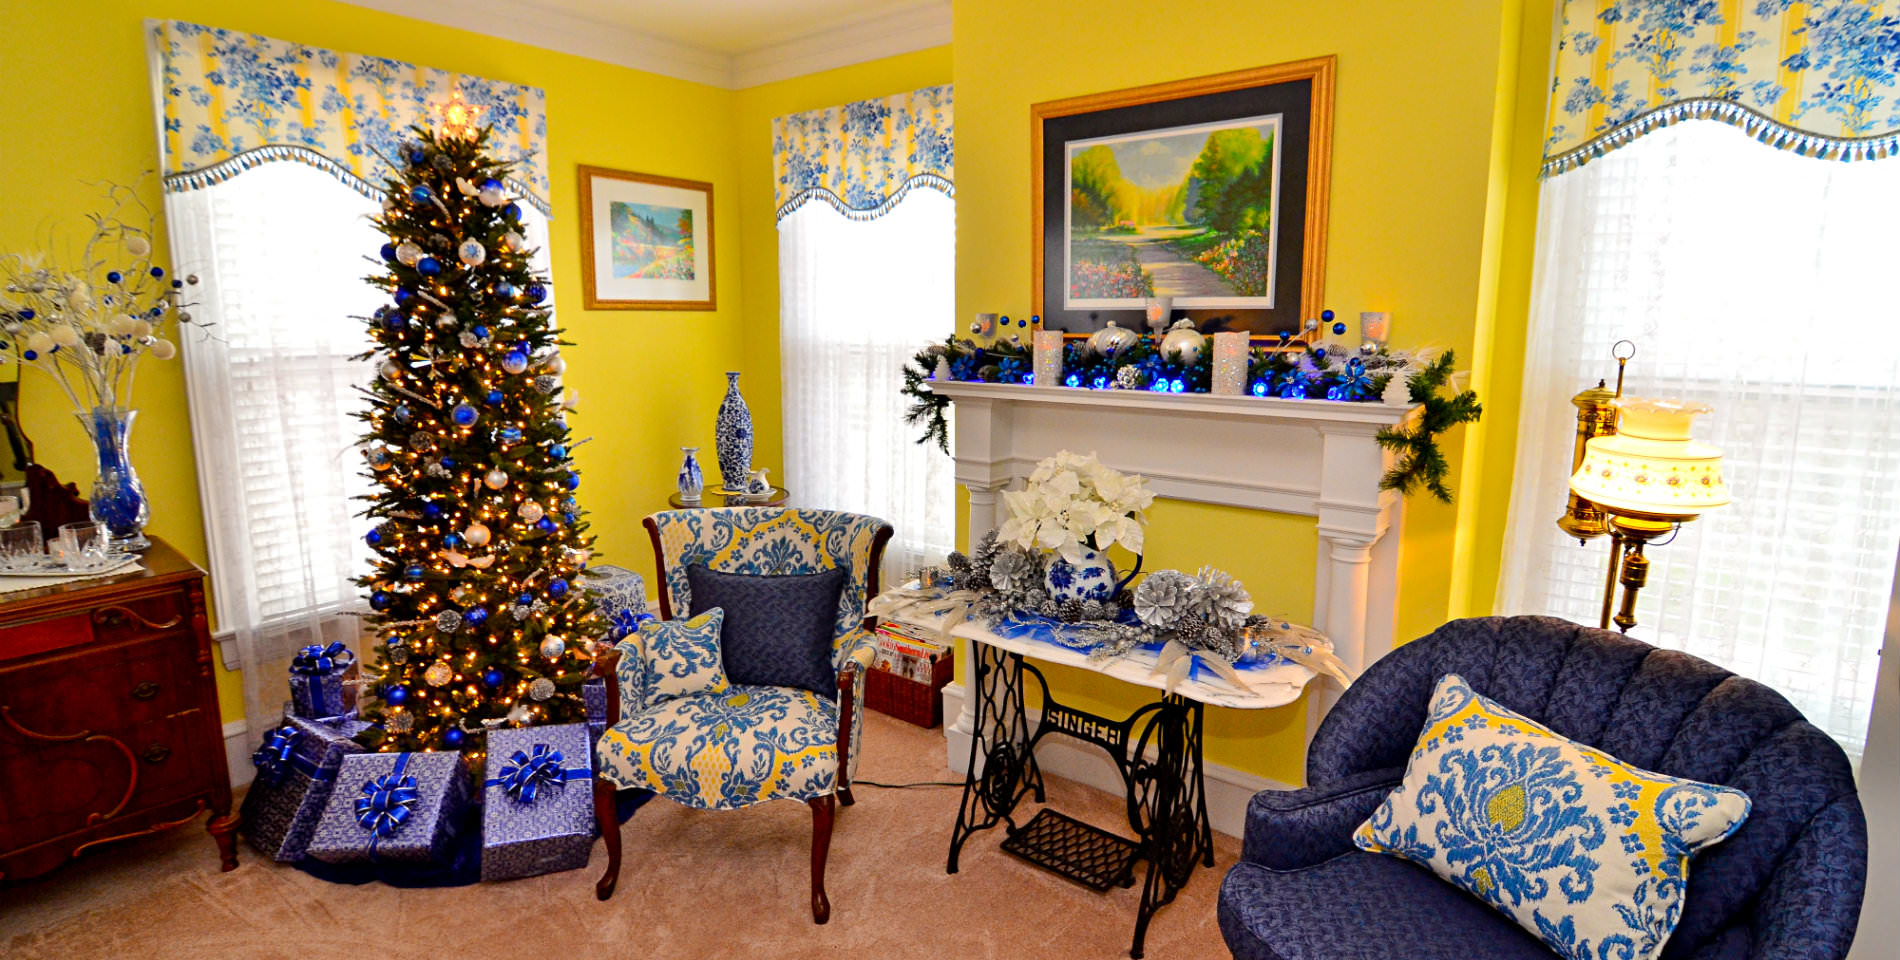 A Christmas tree in the sitting area with festive blue presents and decorations.